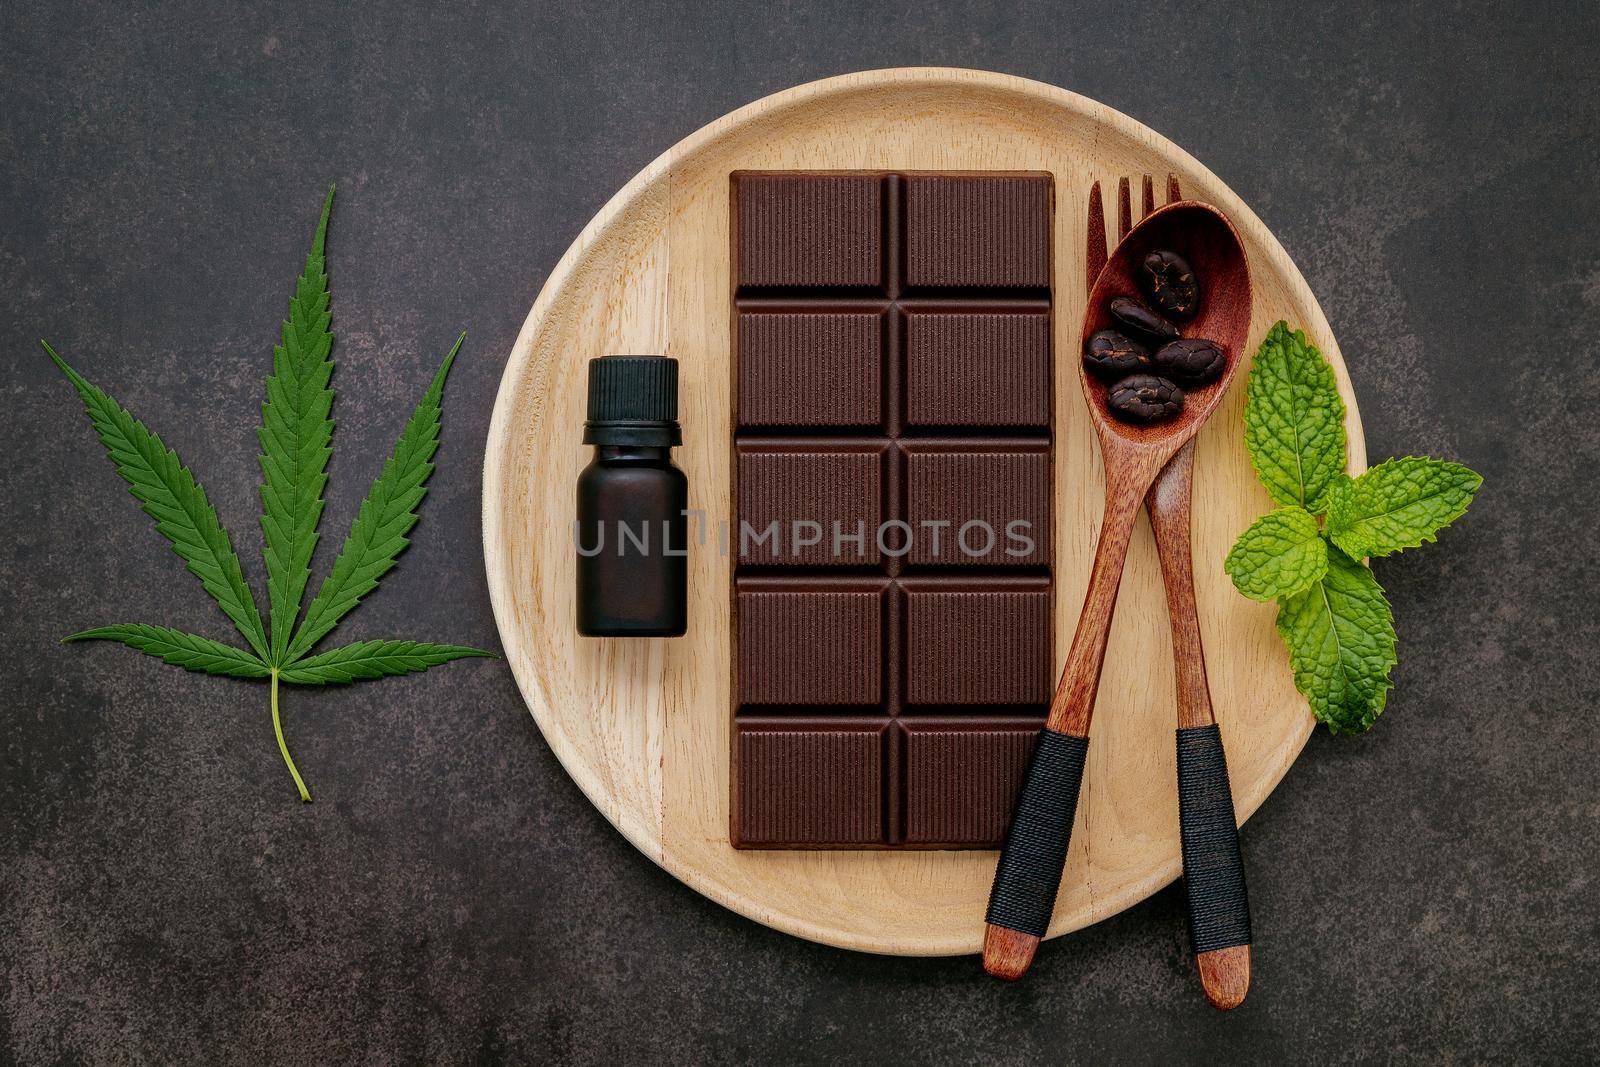 Food conceptual image of  cannabis leaf  with dark chocolate and fork on dark concrete background. by kerdkanno